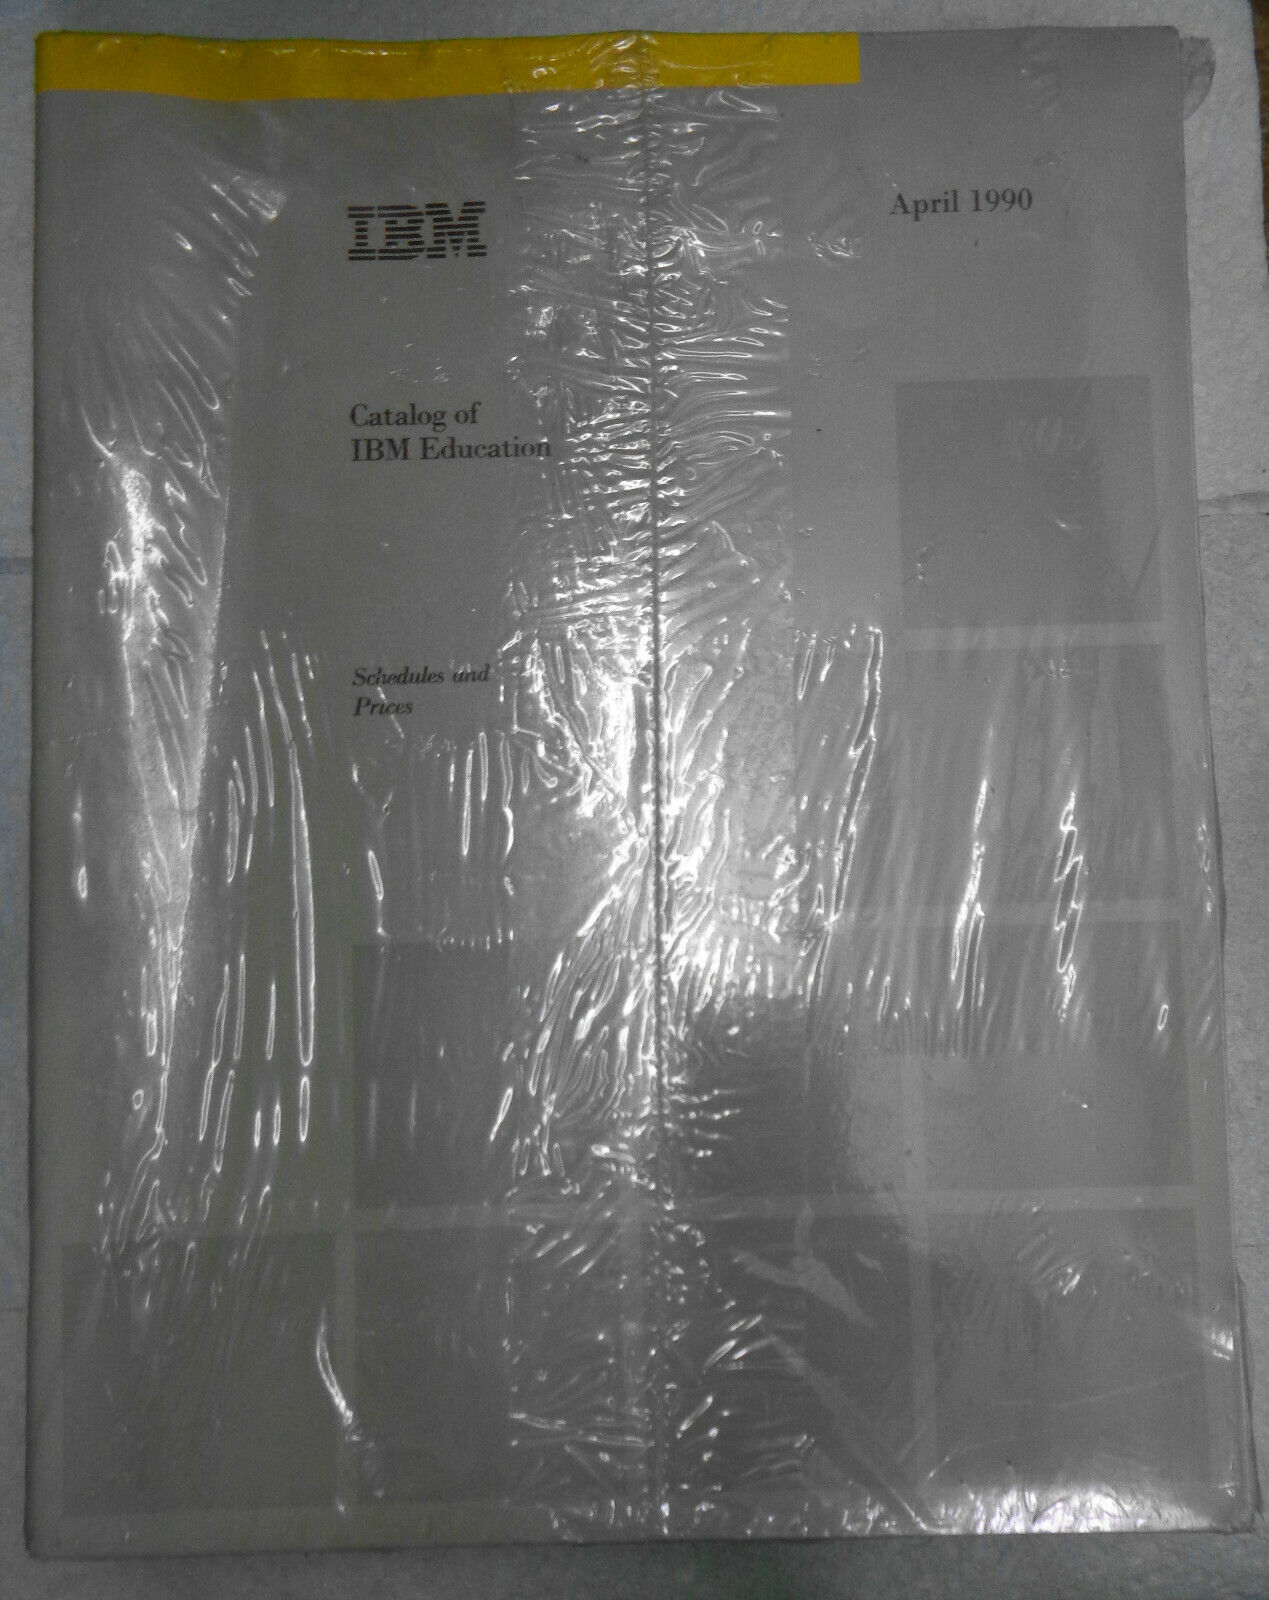 Catalog of IBM education. Schedules and Prices. April 1990. Brand new, sealed. 